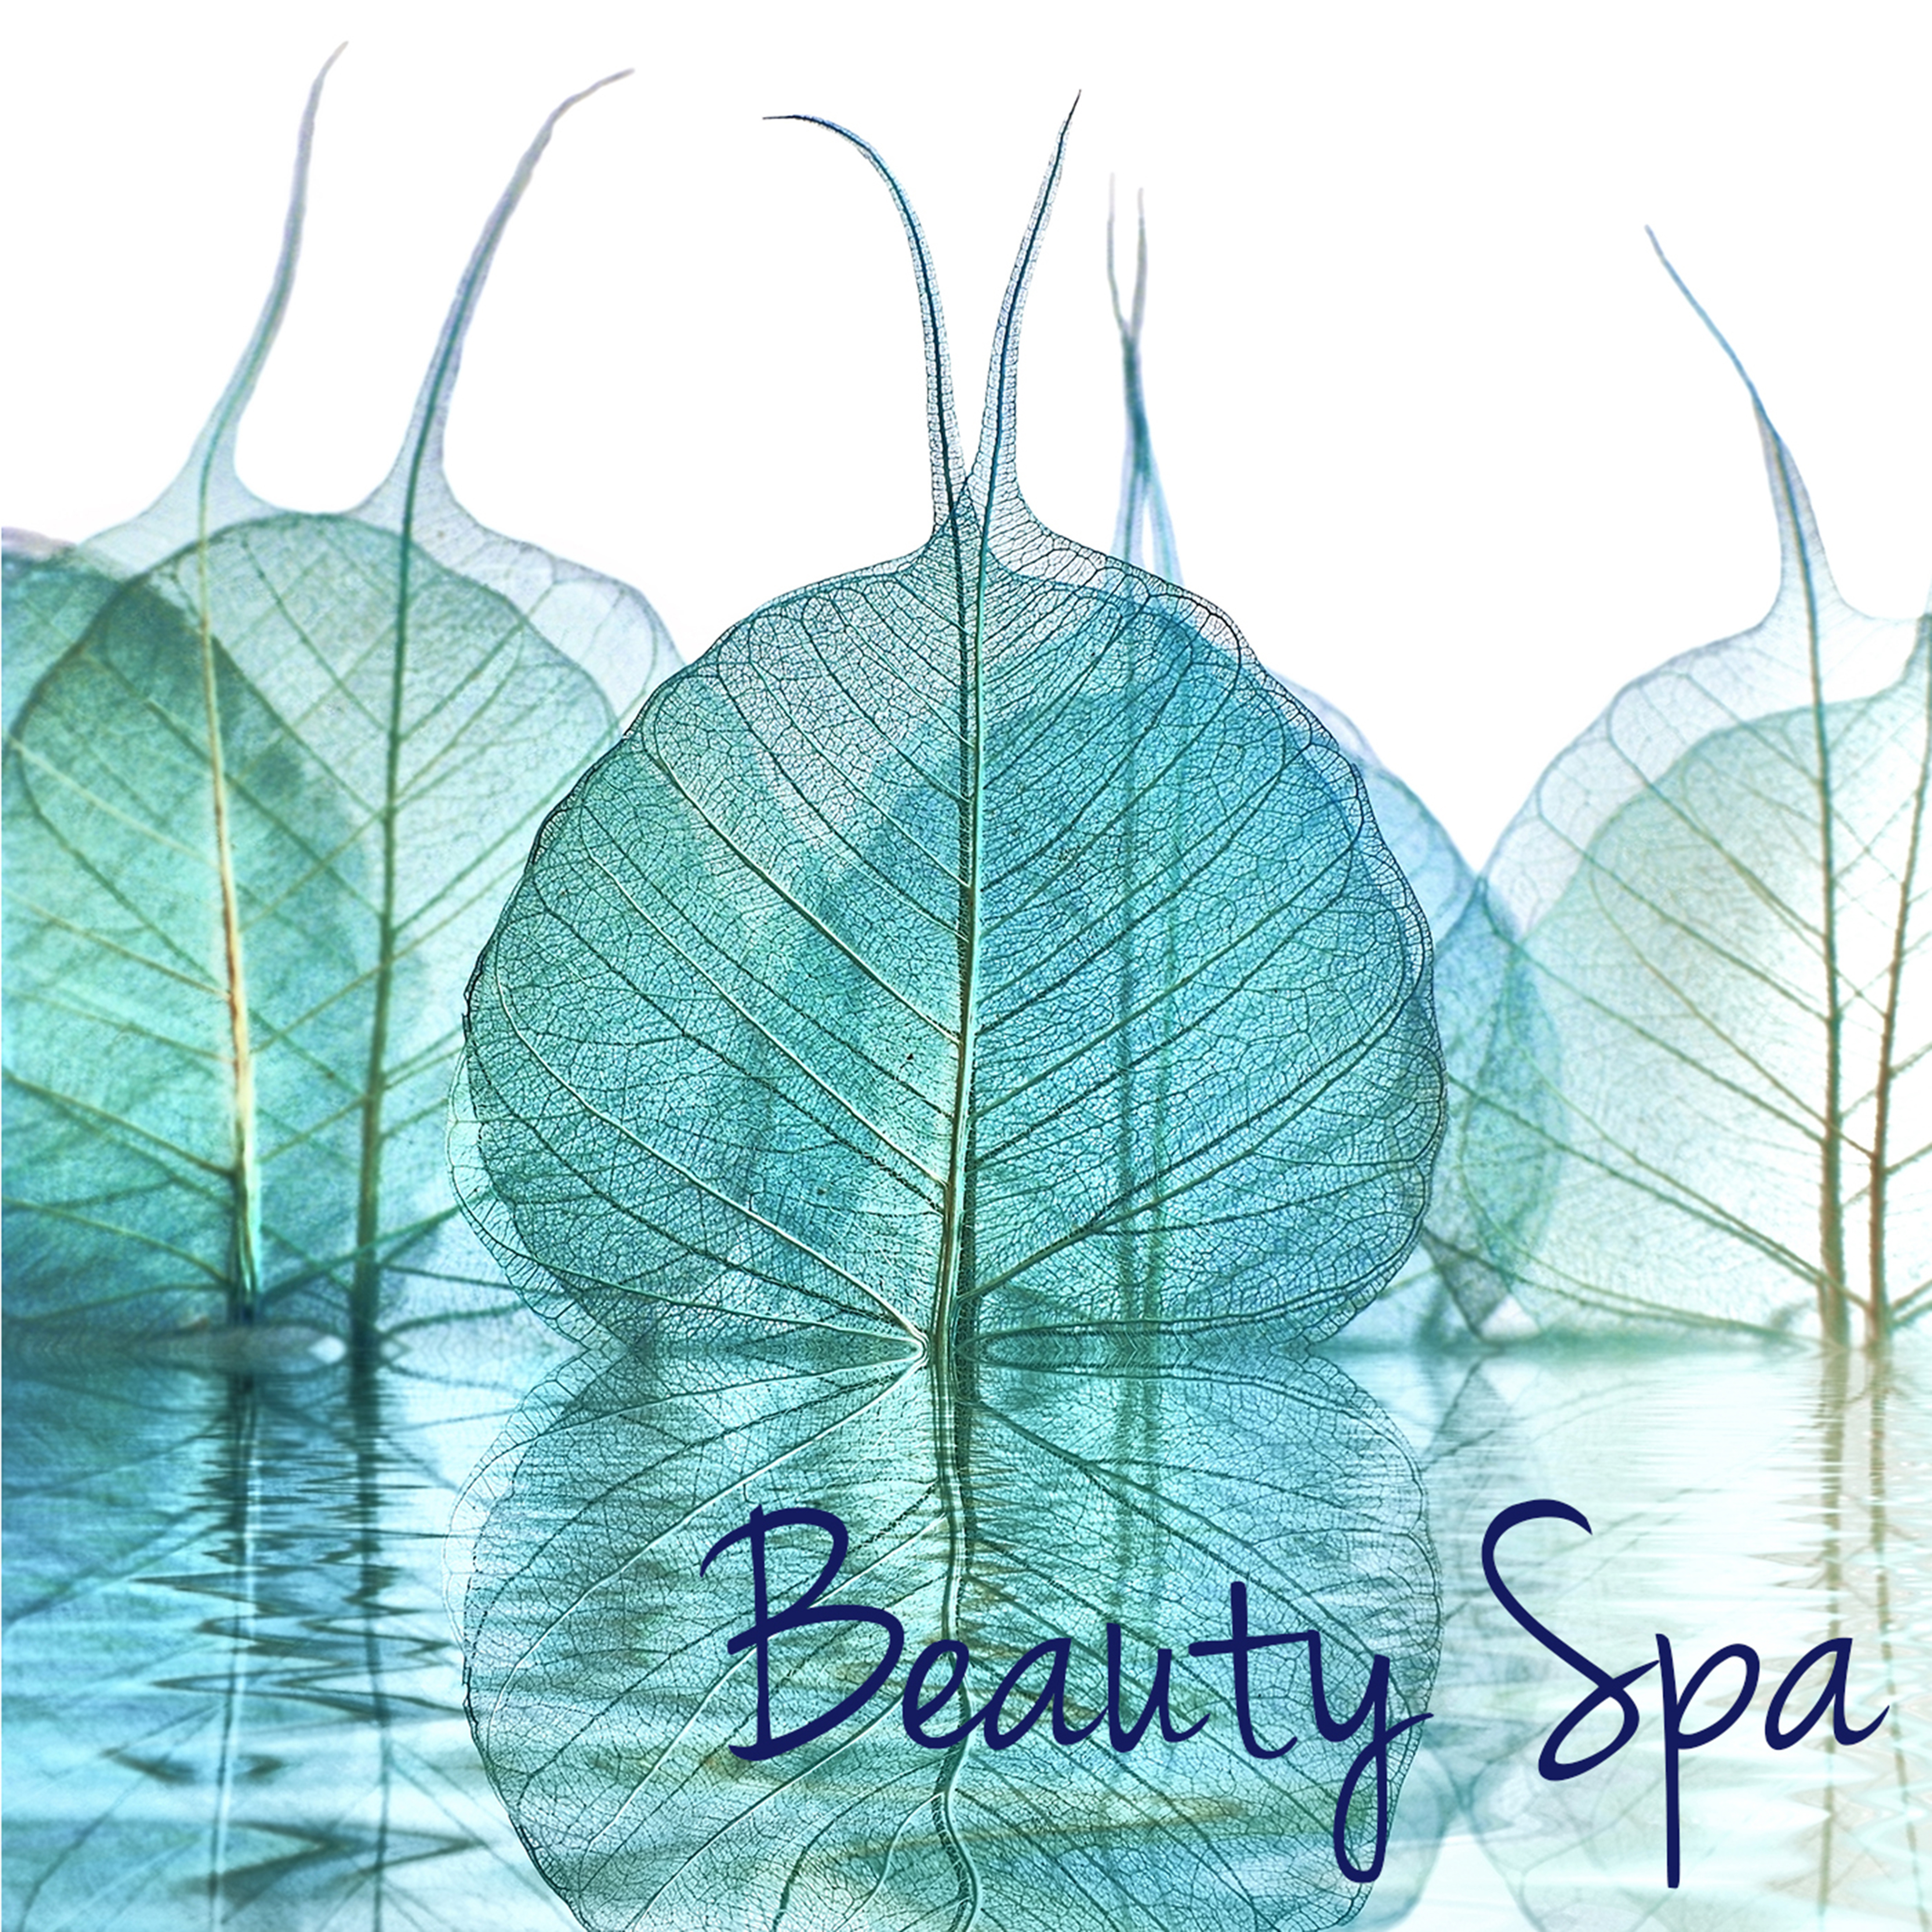 Beauty Spa – New Age Asian & Chill Nature Songs for Spa, Massage, Relax, Sauna & Zen Meditation